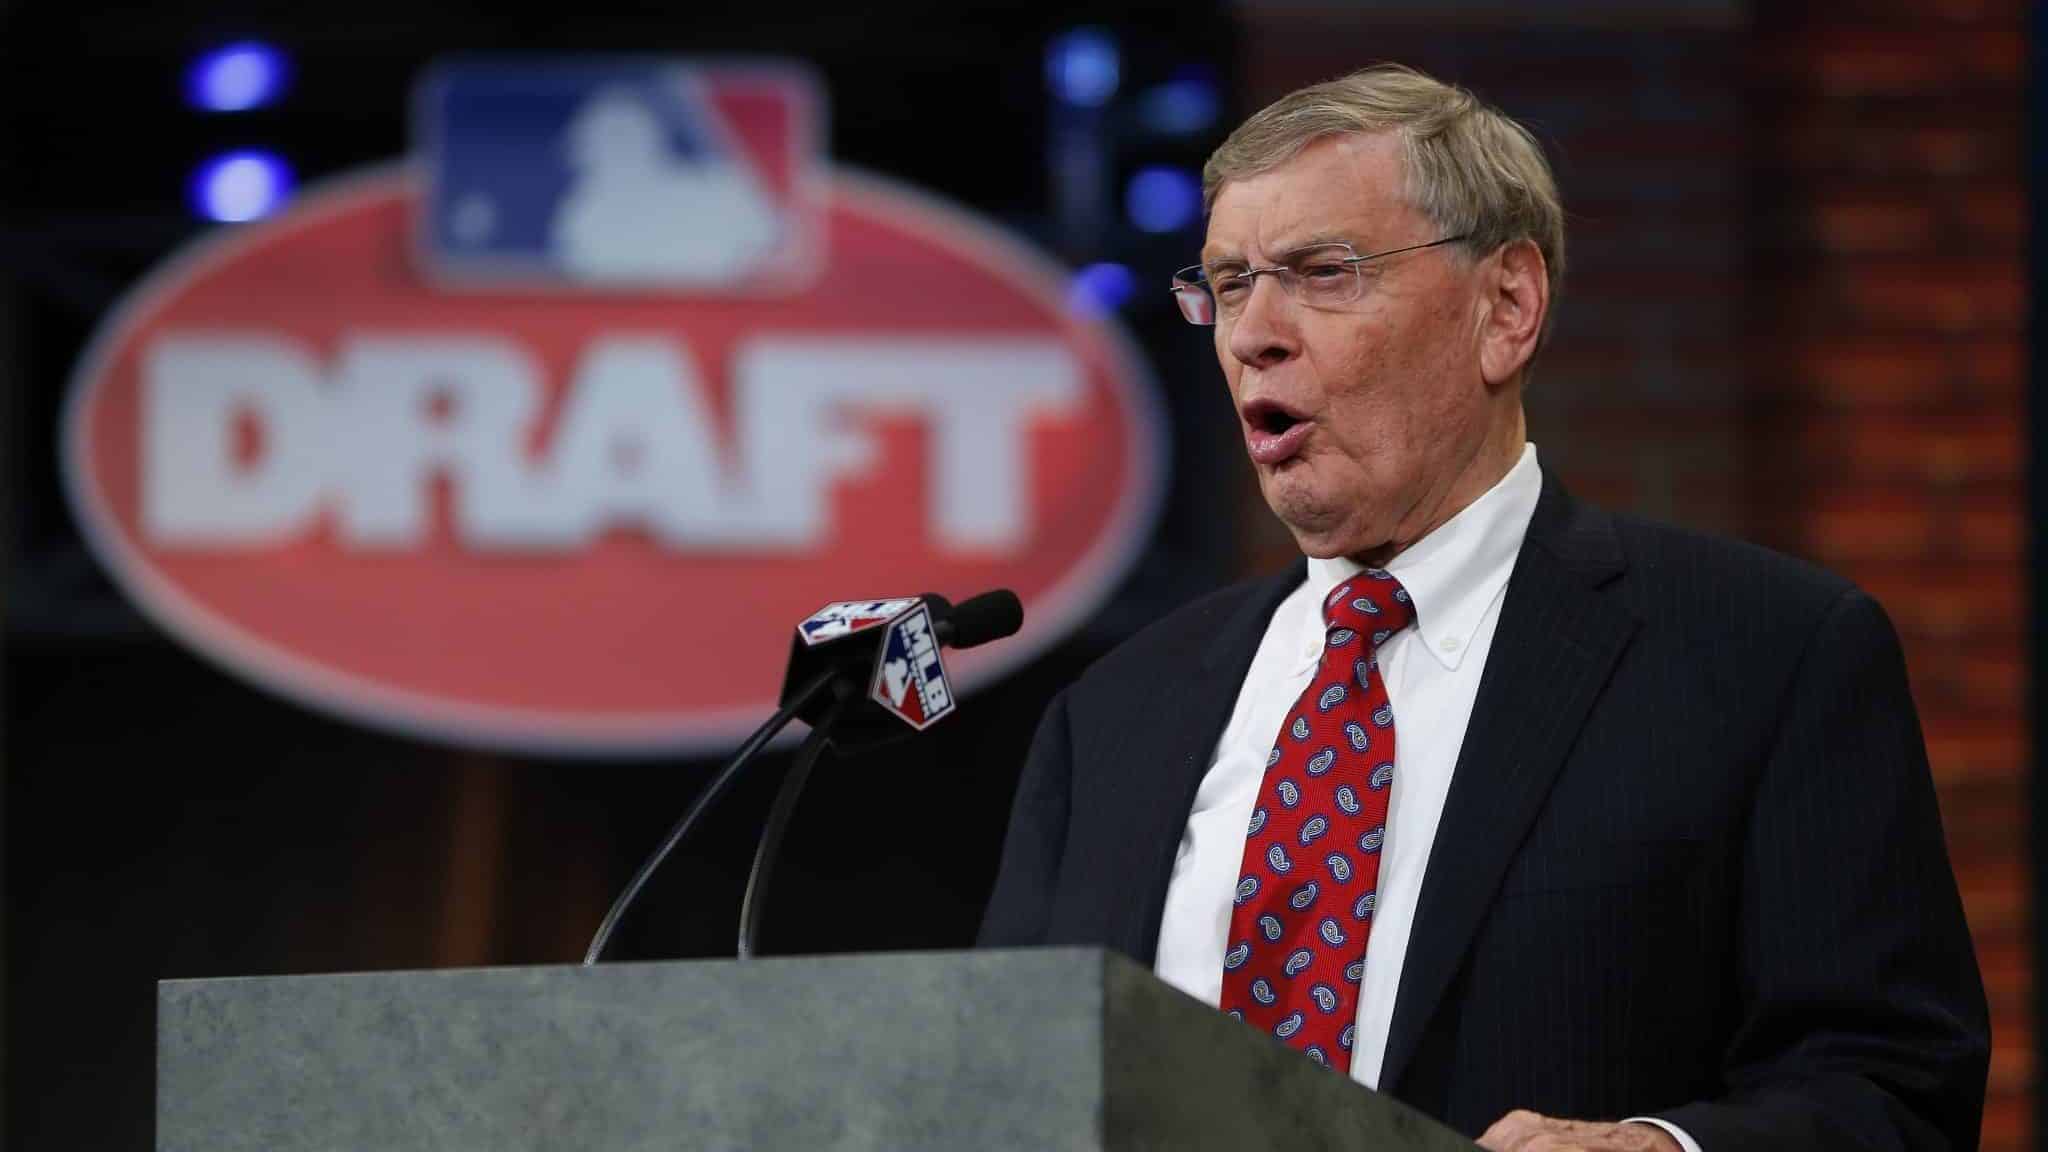 SECAUCUS, NJ - JUNE 5: Commissioner Allan H. Bud Selig speaks at the podium during the MLB First-Year Player Draft at the MLB Network Studio on June 5, 2014 in Secacucus, New Jersey.